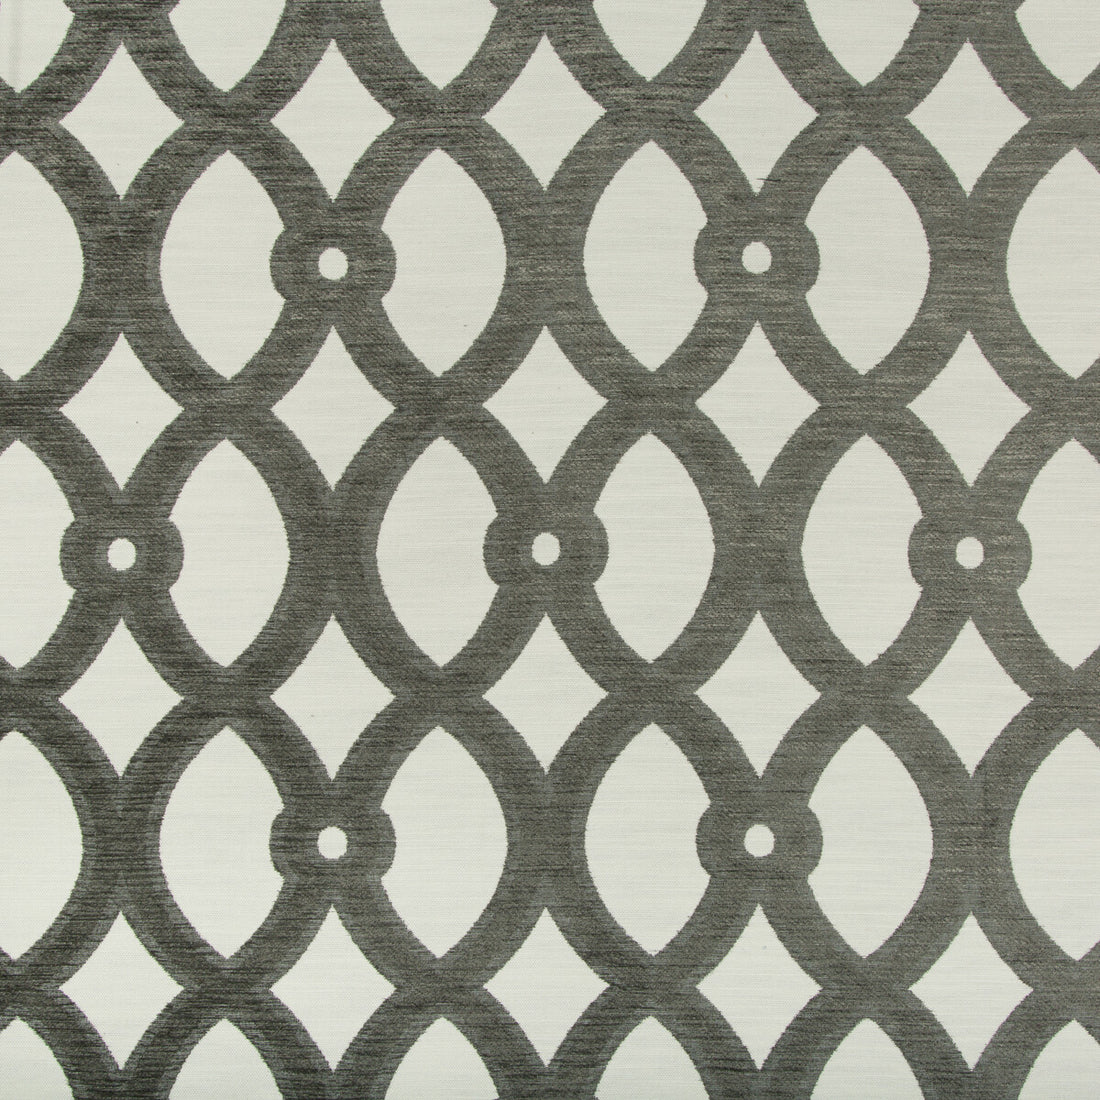 Kravet Design fabric in 34702-21 color - pattern 34702.21.0 - by Kravet Design in the Performance Crypton Home collection